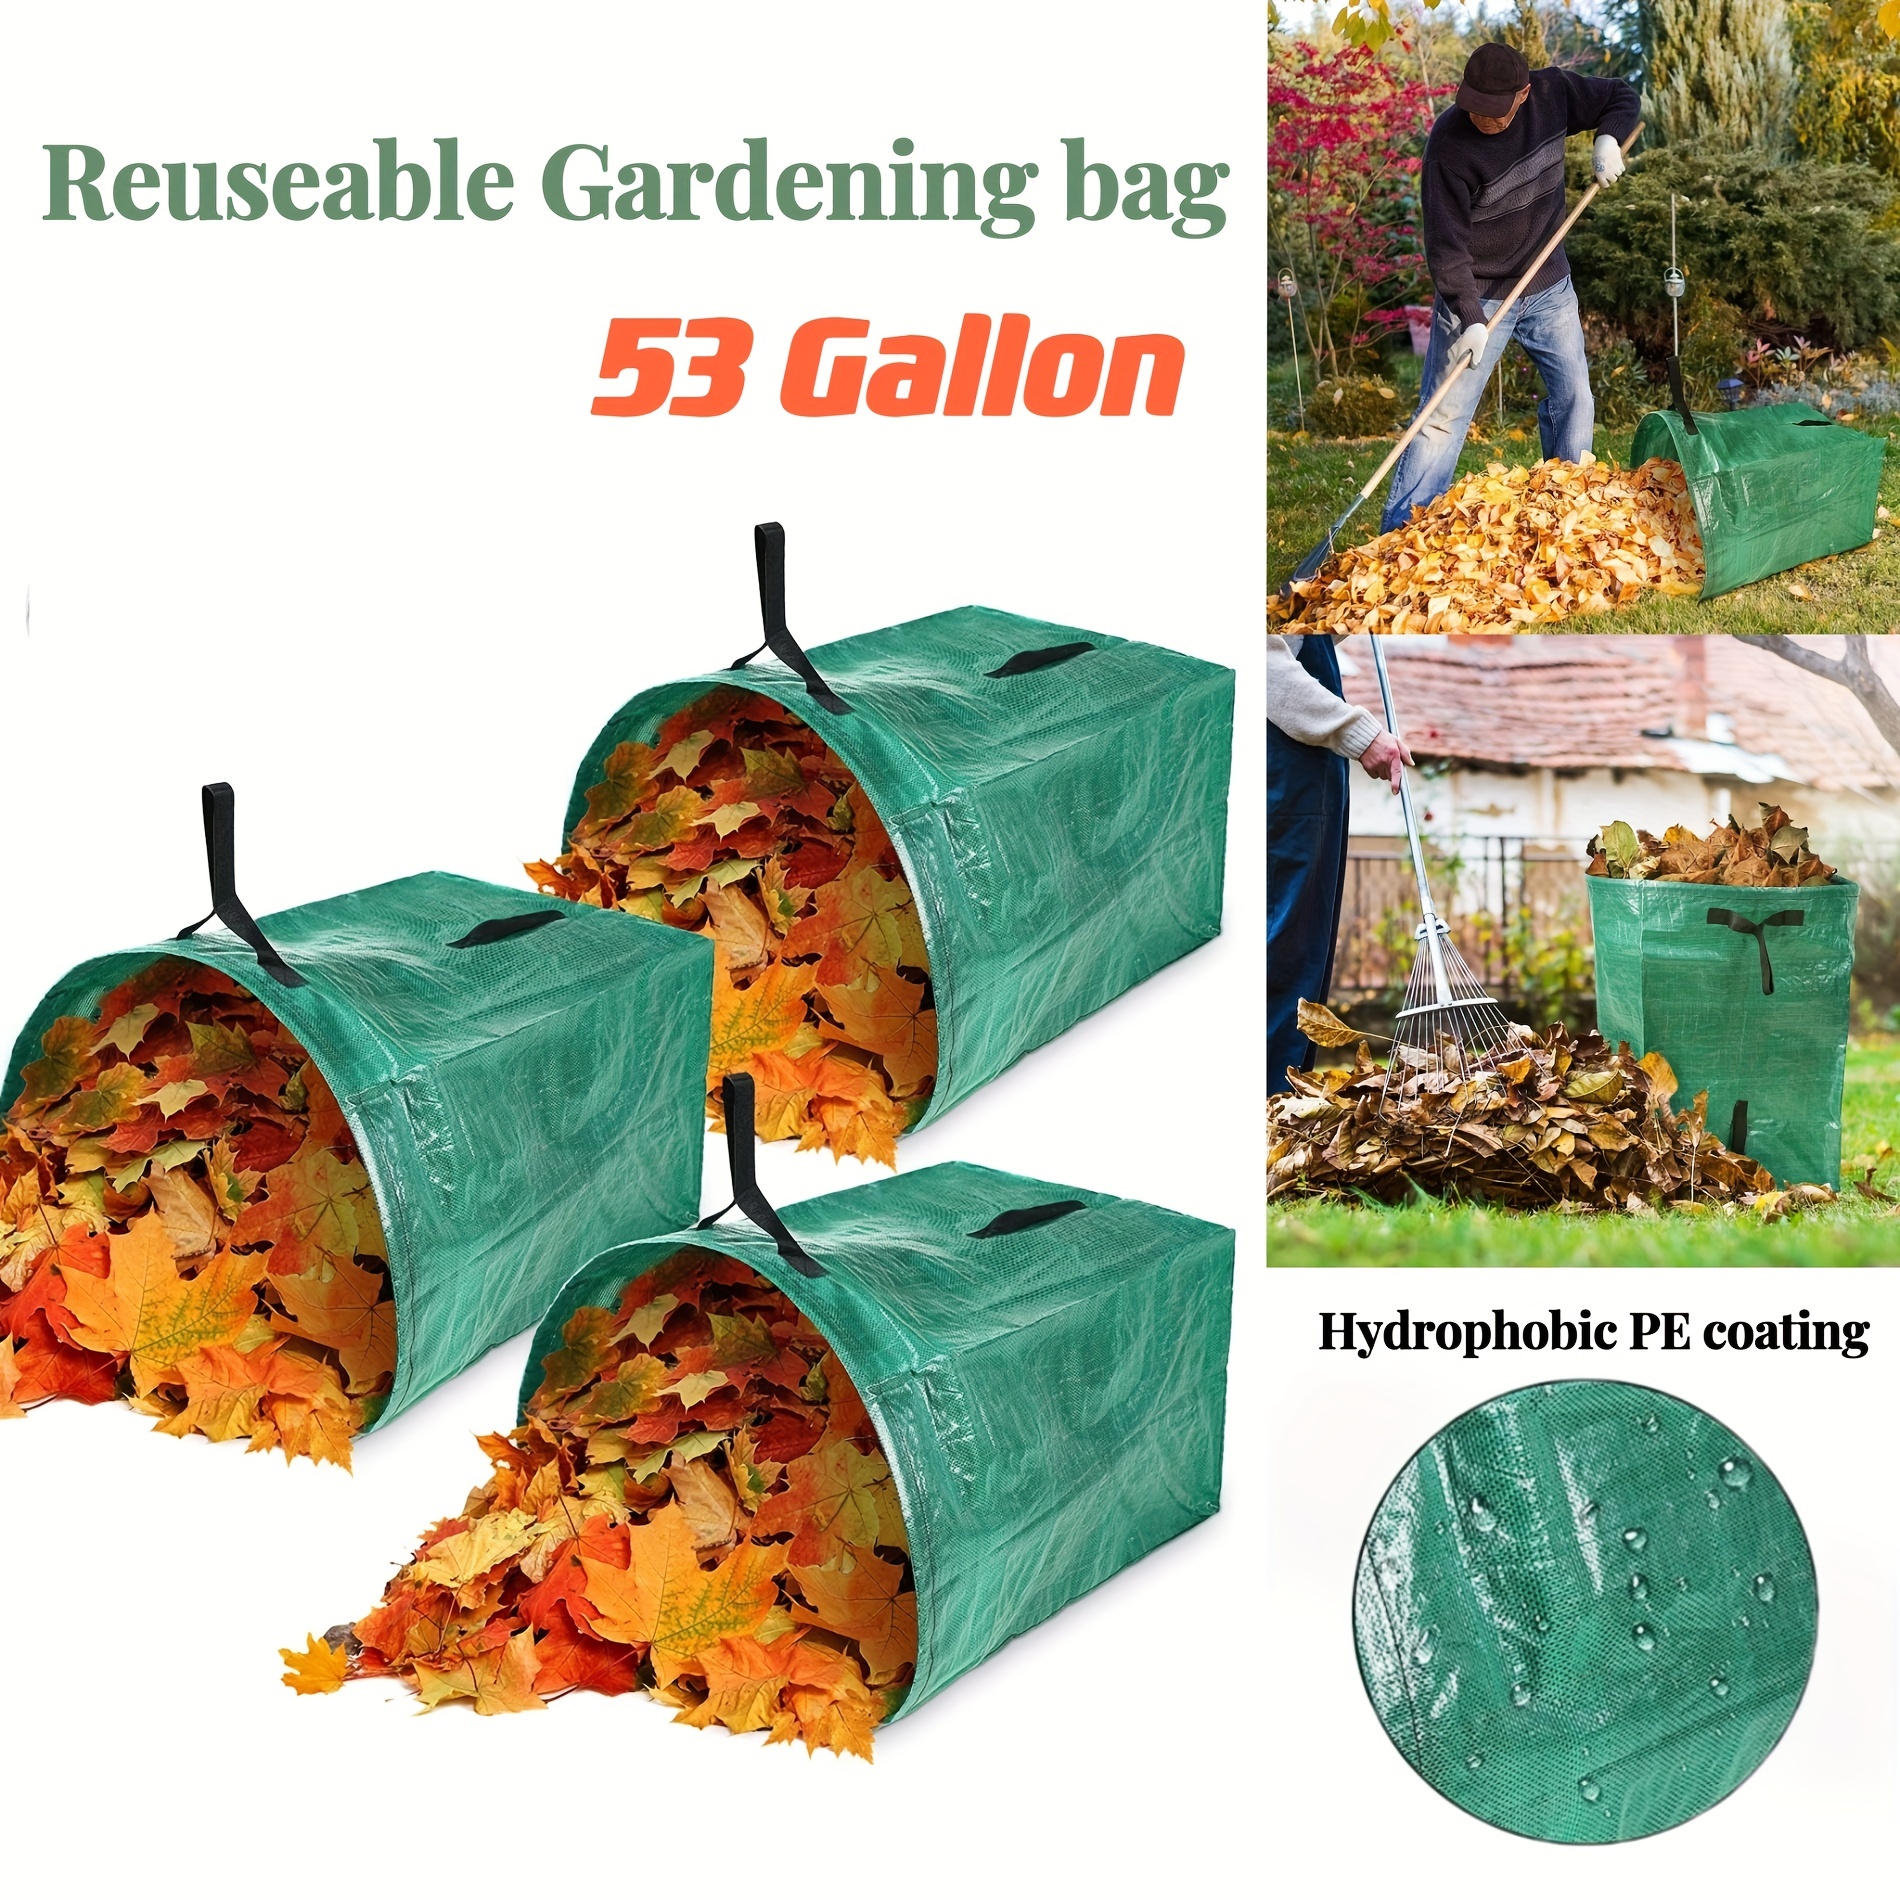  Garnen 72 Gallon Garden Waste Bags (2 Pack), Heavy Duty  Reusable/Collapsible Leaf Basket Bags with 4 Reinforced Handles for Lawn  Yard Pool Plant Trash Trimming Gardening Containers : Patio, Lawn & Garden